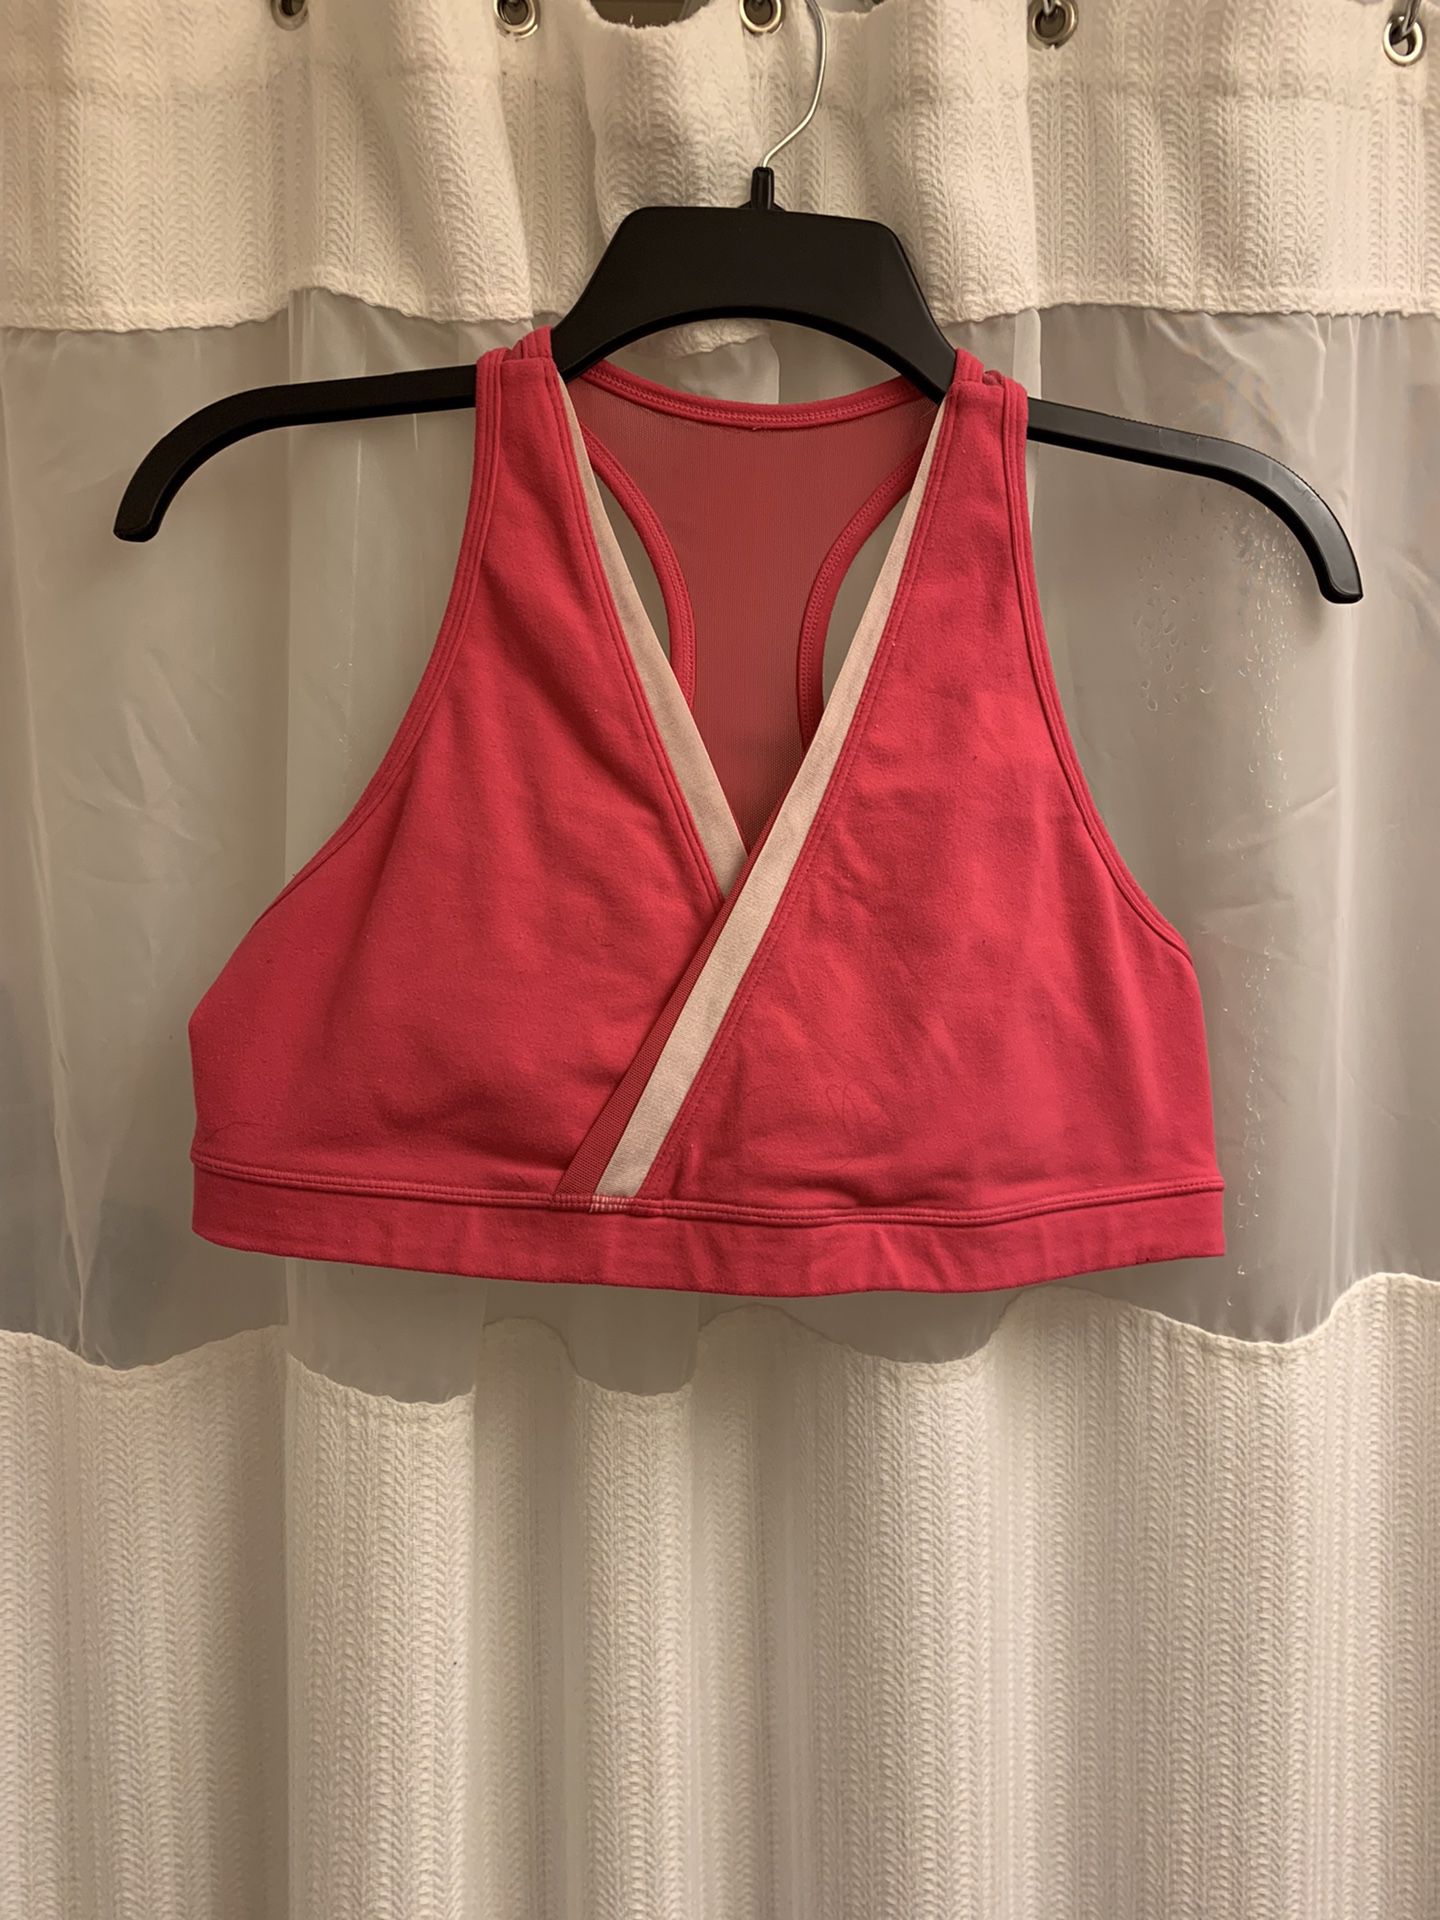 Lululemon pink front wrap sports bra size 12 fair condition, used, no bra pads included